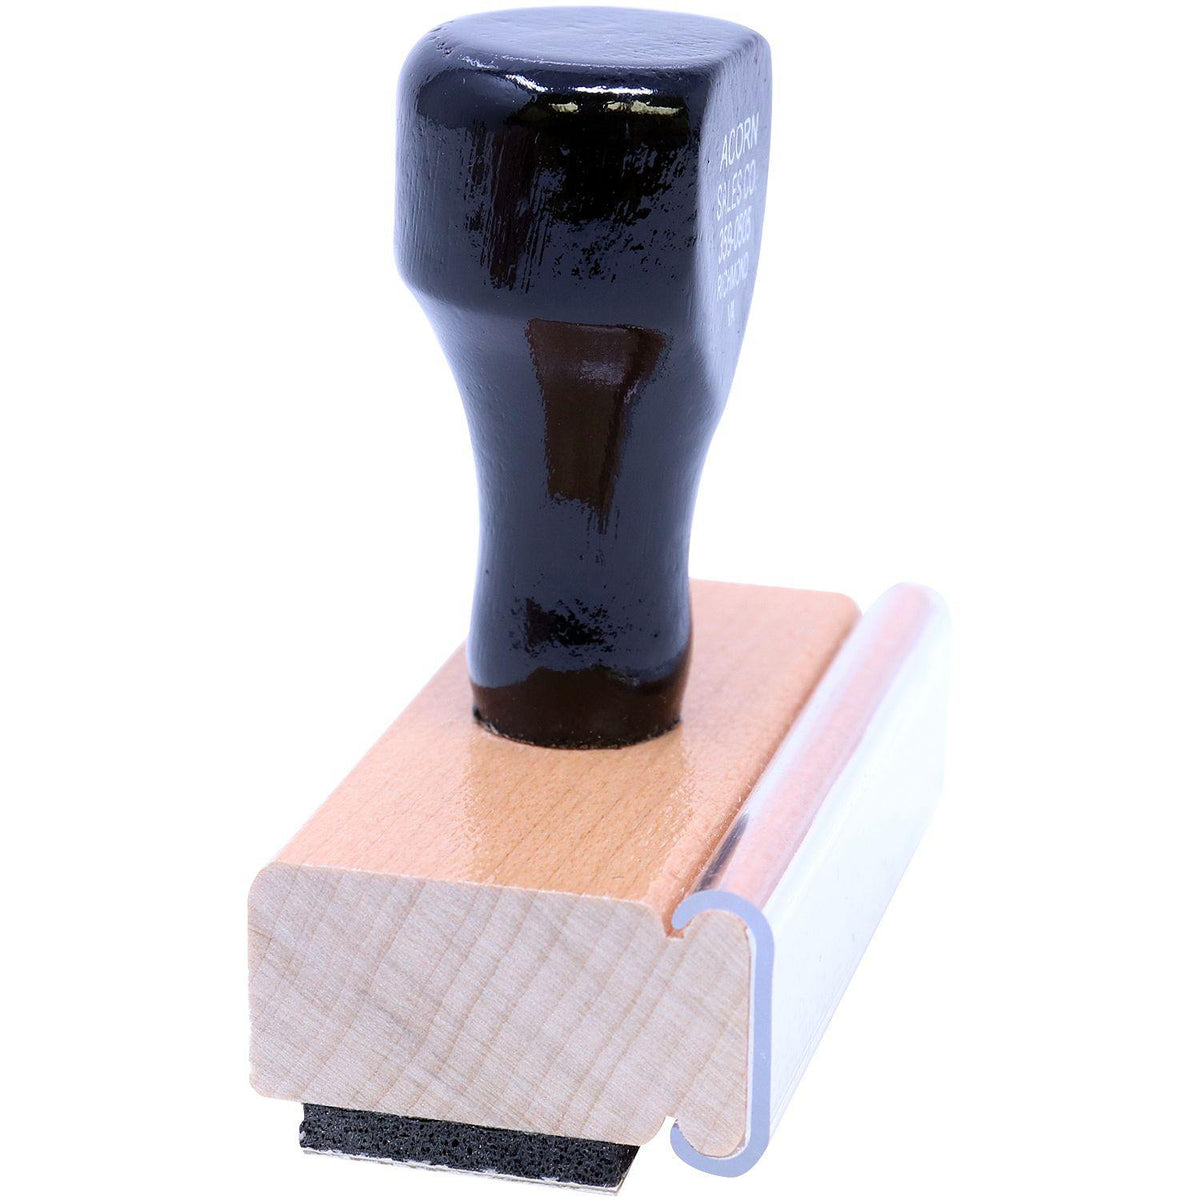 SAM Rubber Stamp - Engineer Seal Stamps - Brand_Acorn, Impression Size_Small, Stamp Type_Regular Stamp, Type of Use_Medical Office